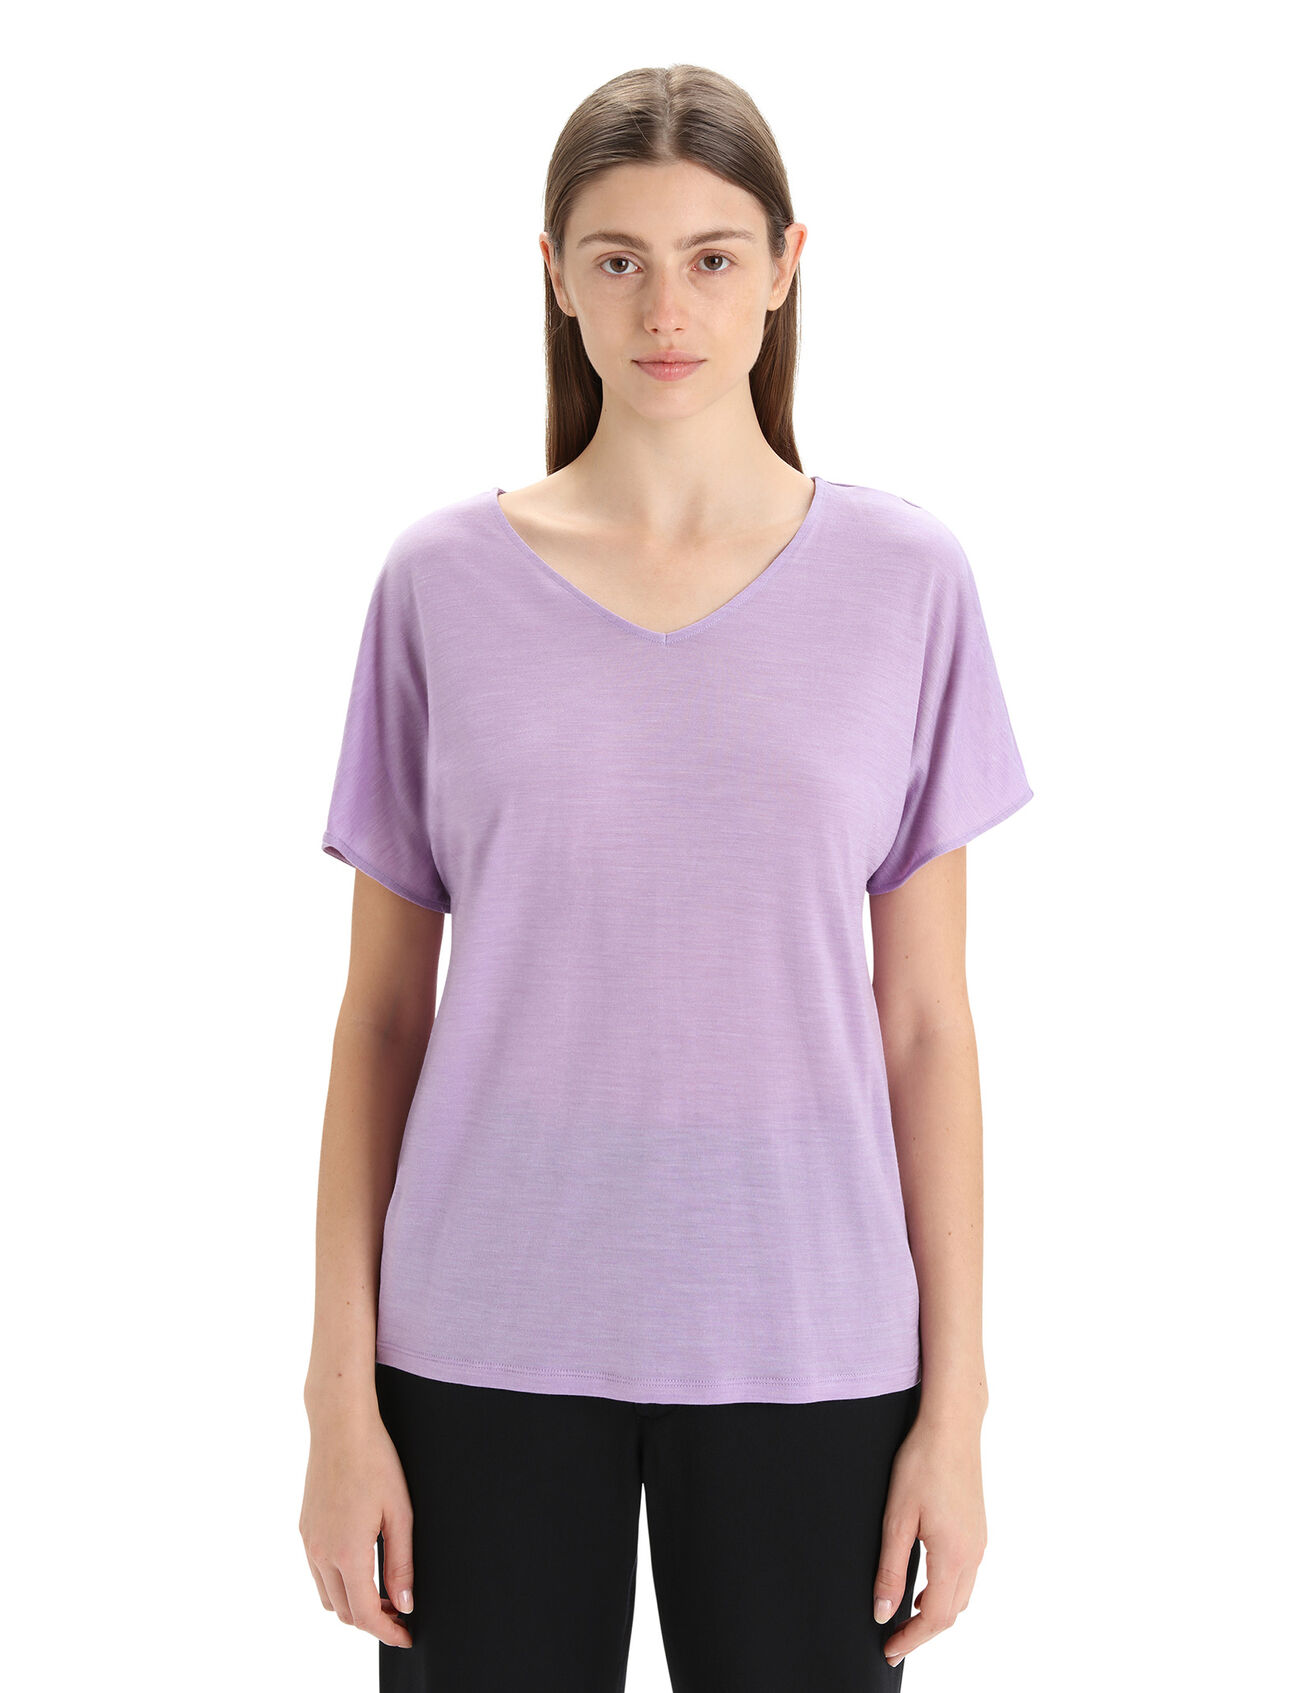 para mujer Merino Drayden Reversible Short Sleeve Top A versatile everyday shirt featuring our Cool-Lite™ jersey fabric, the Drayden Reversible Short Sleeve Top can be worn frontwards for a soft V neck, or backwards for a high crew neck.